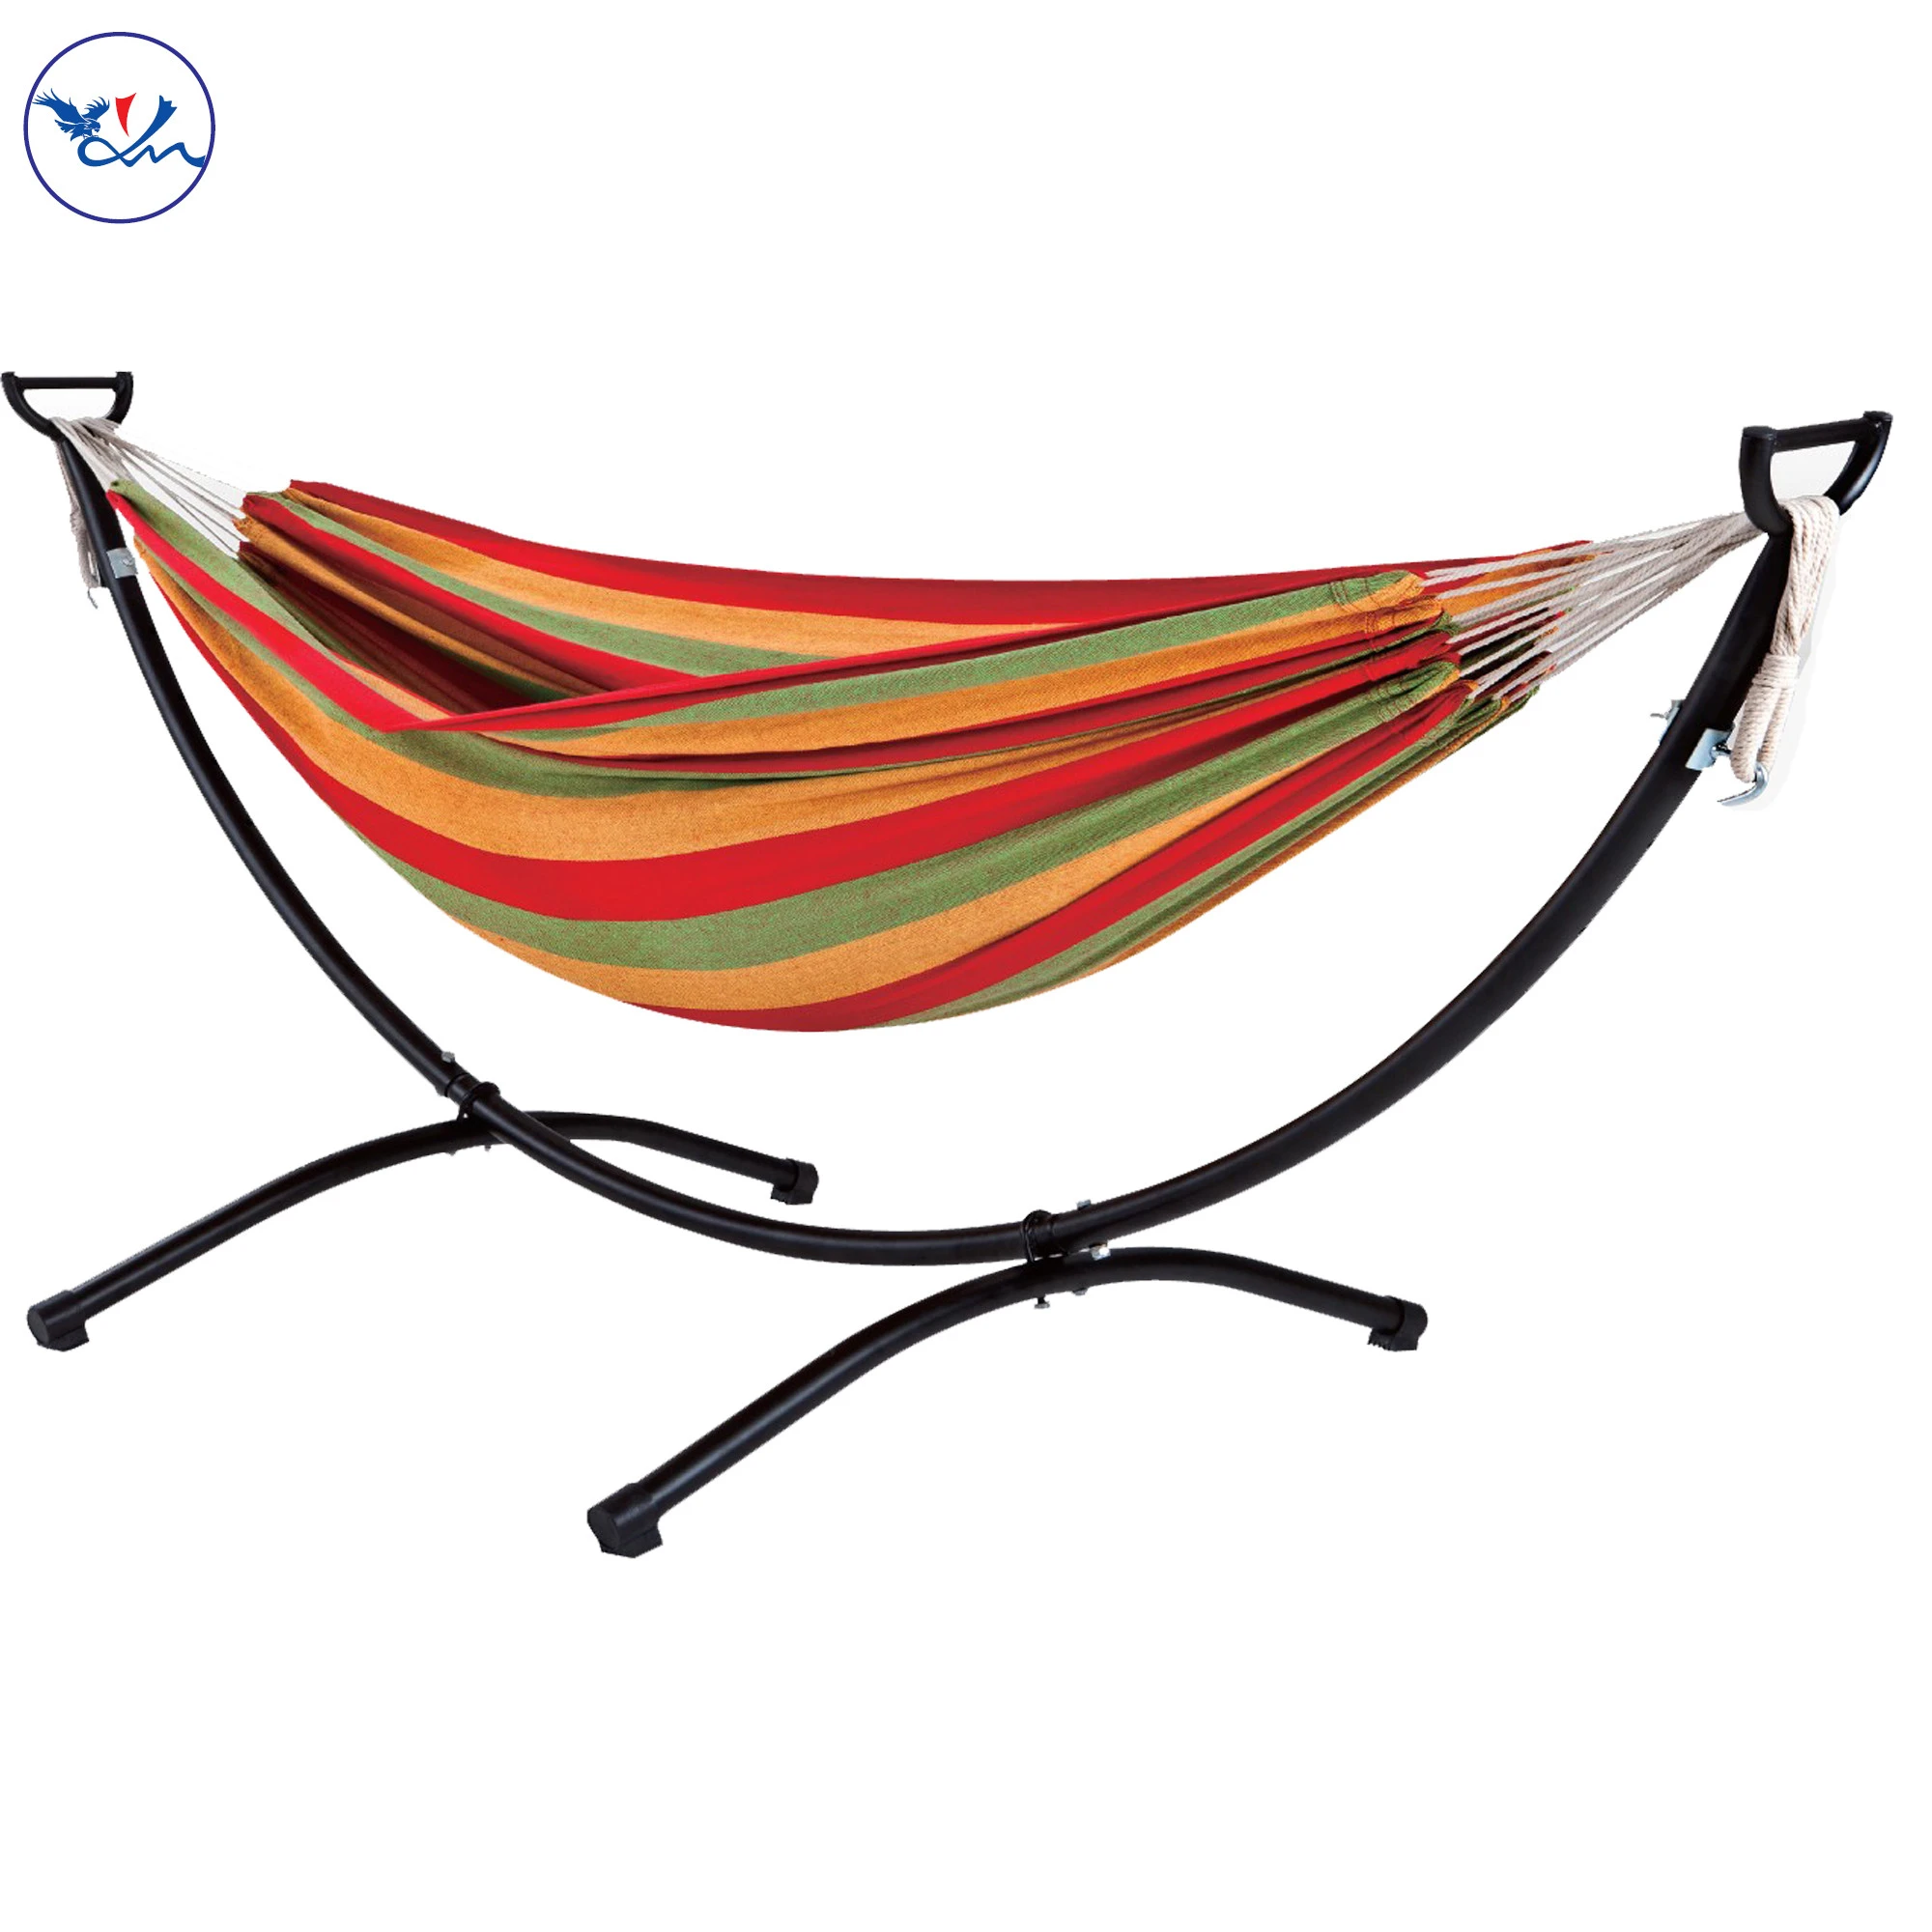 8.3 Feet Steel Hammock Stand Portable Hammock Stand 450 Pounds Weight Capacity